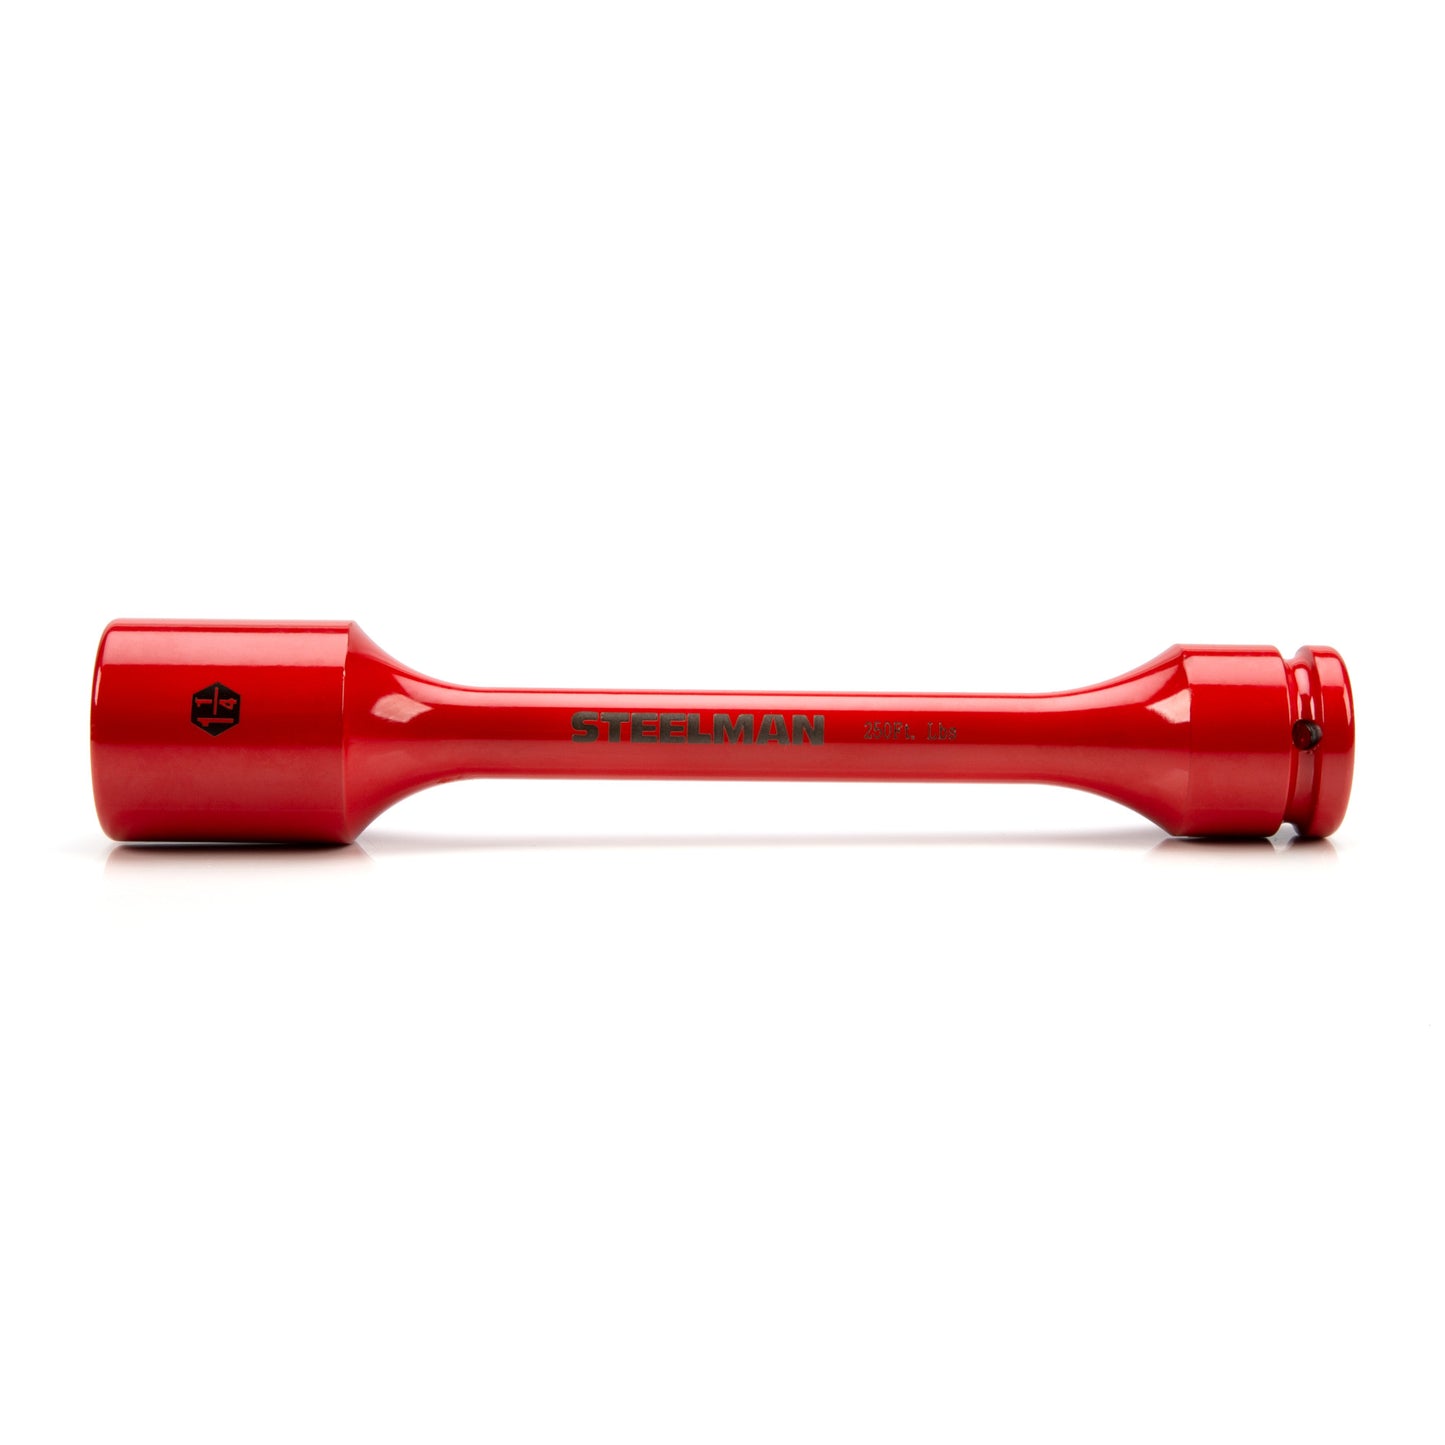 3/4-Inch Drive x 1-1/4-Inch 250 ft-lb Torque Stick, Red